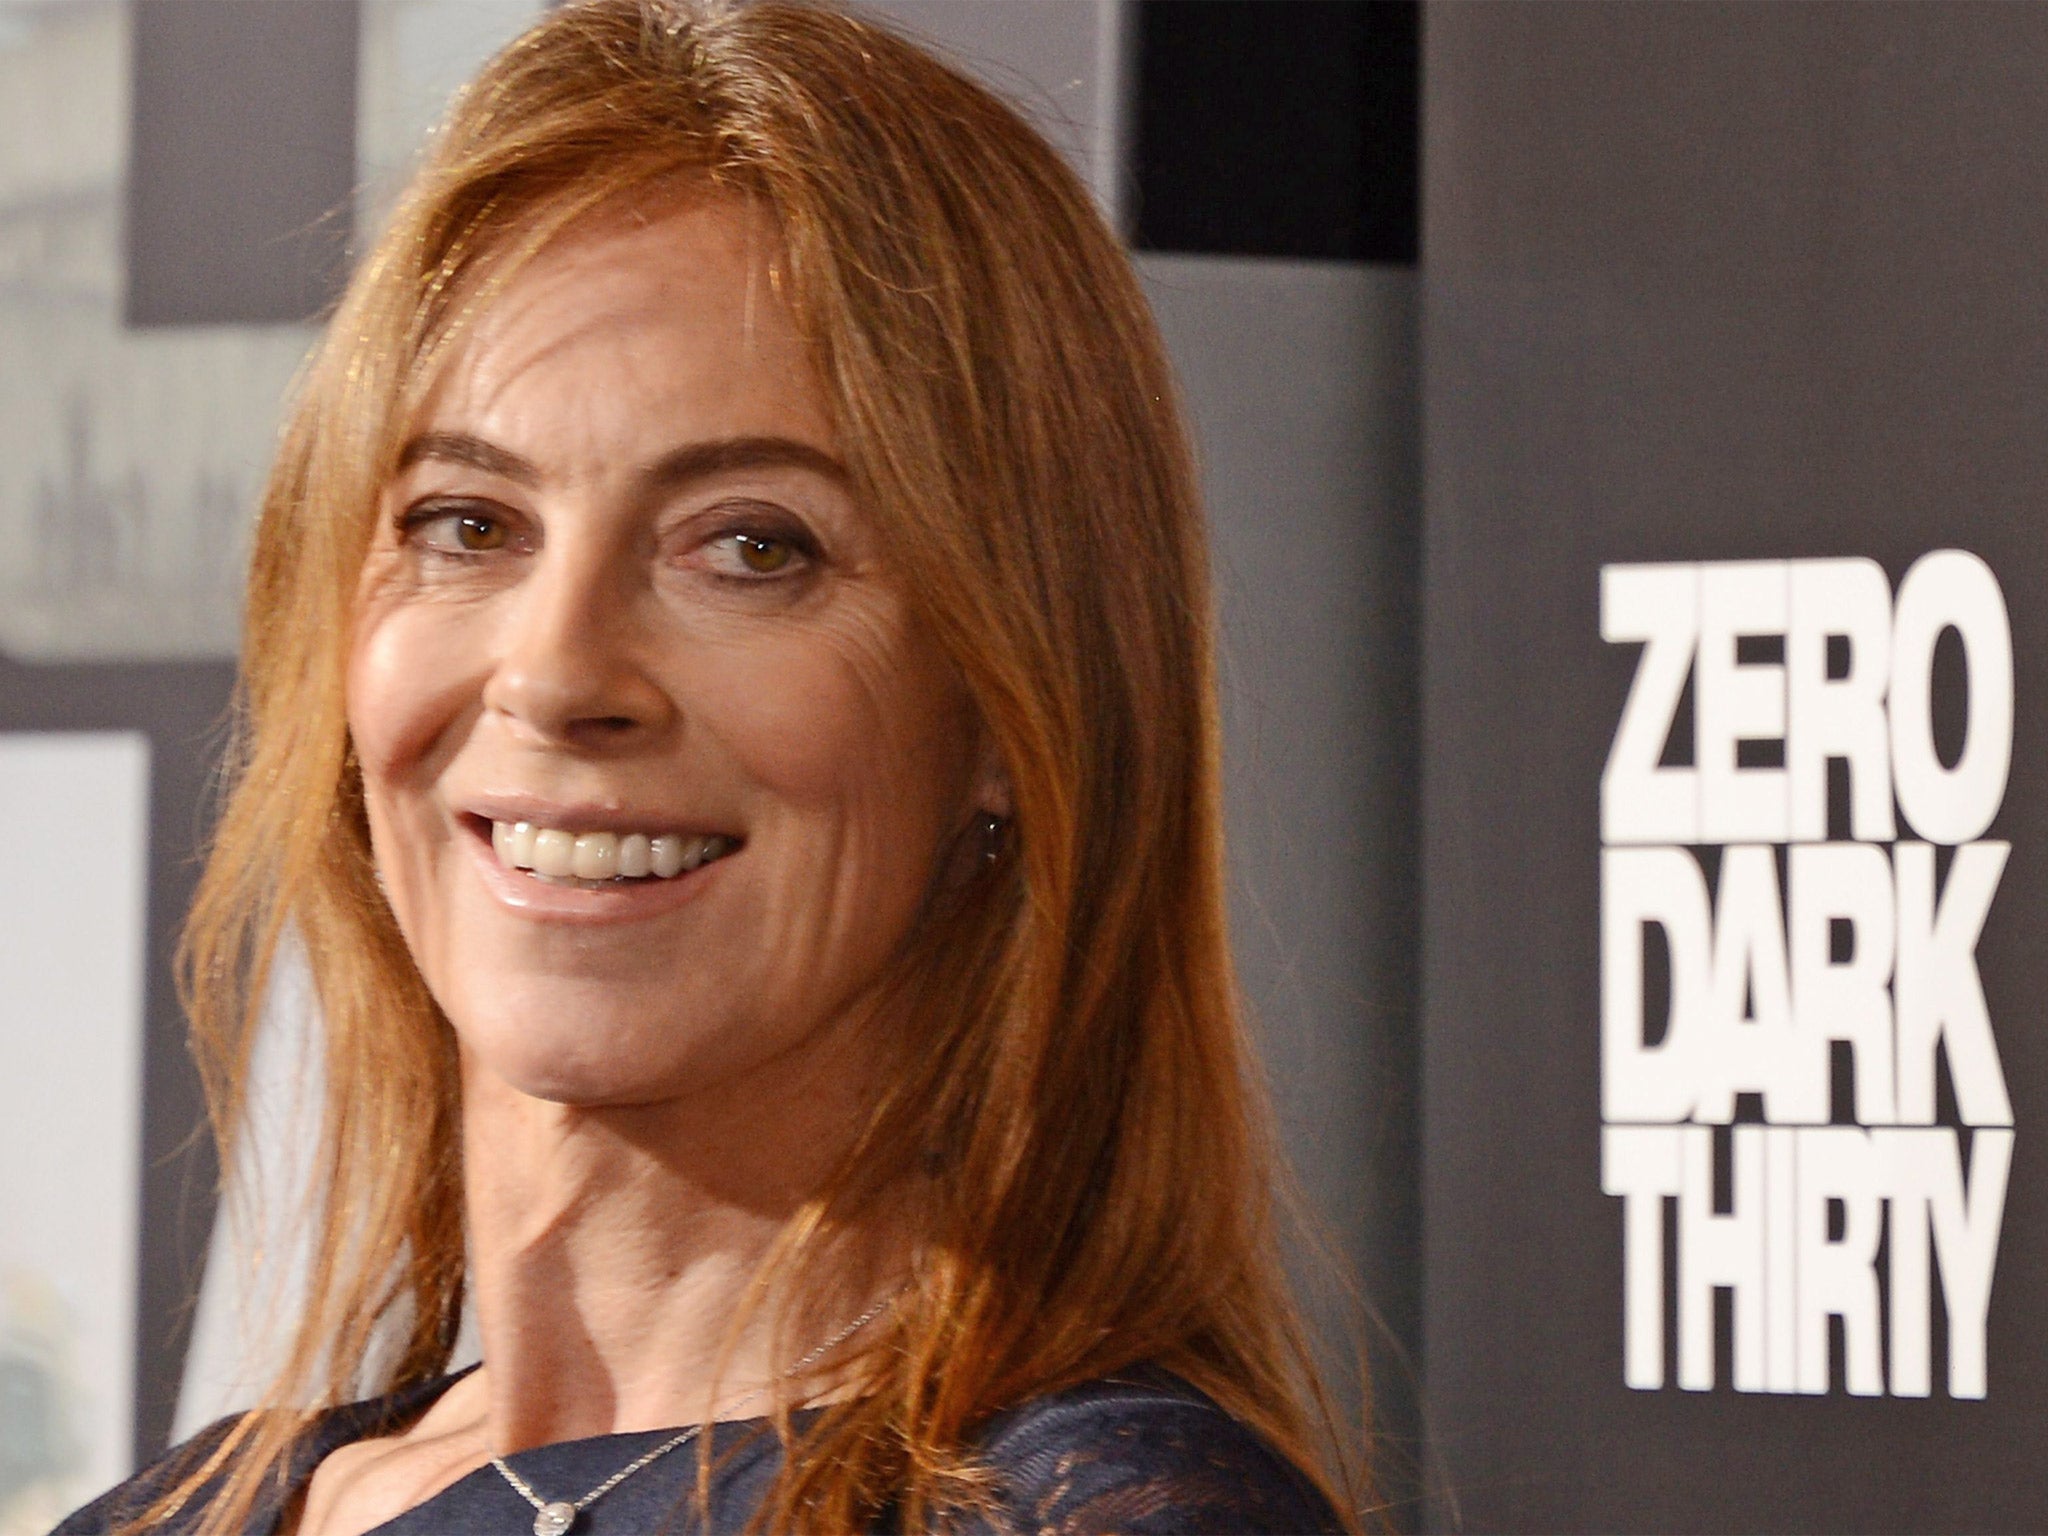 What first did Kathryn Bigelow, director of The Hurt Locker, achieve in 2010? (Getty)